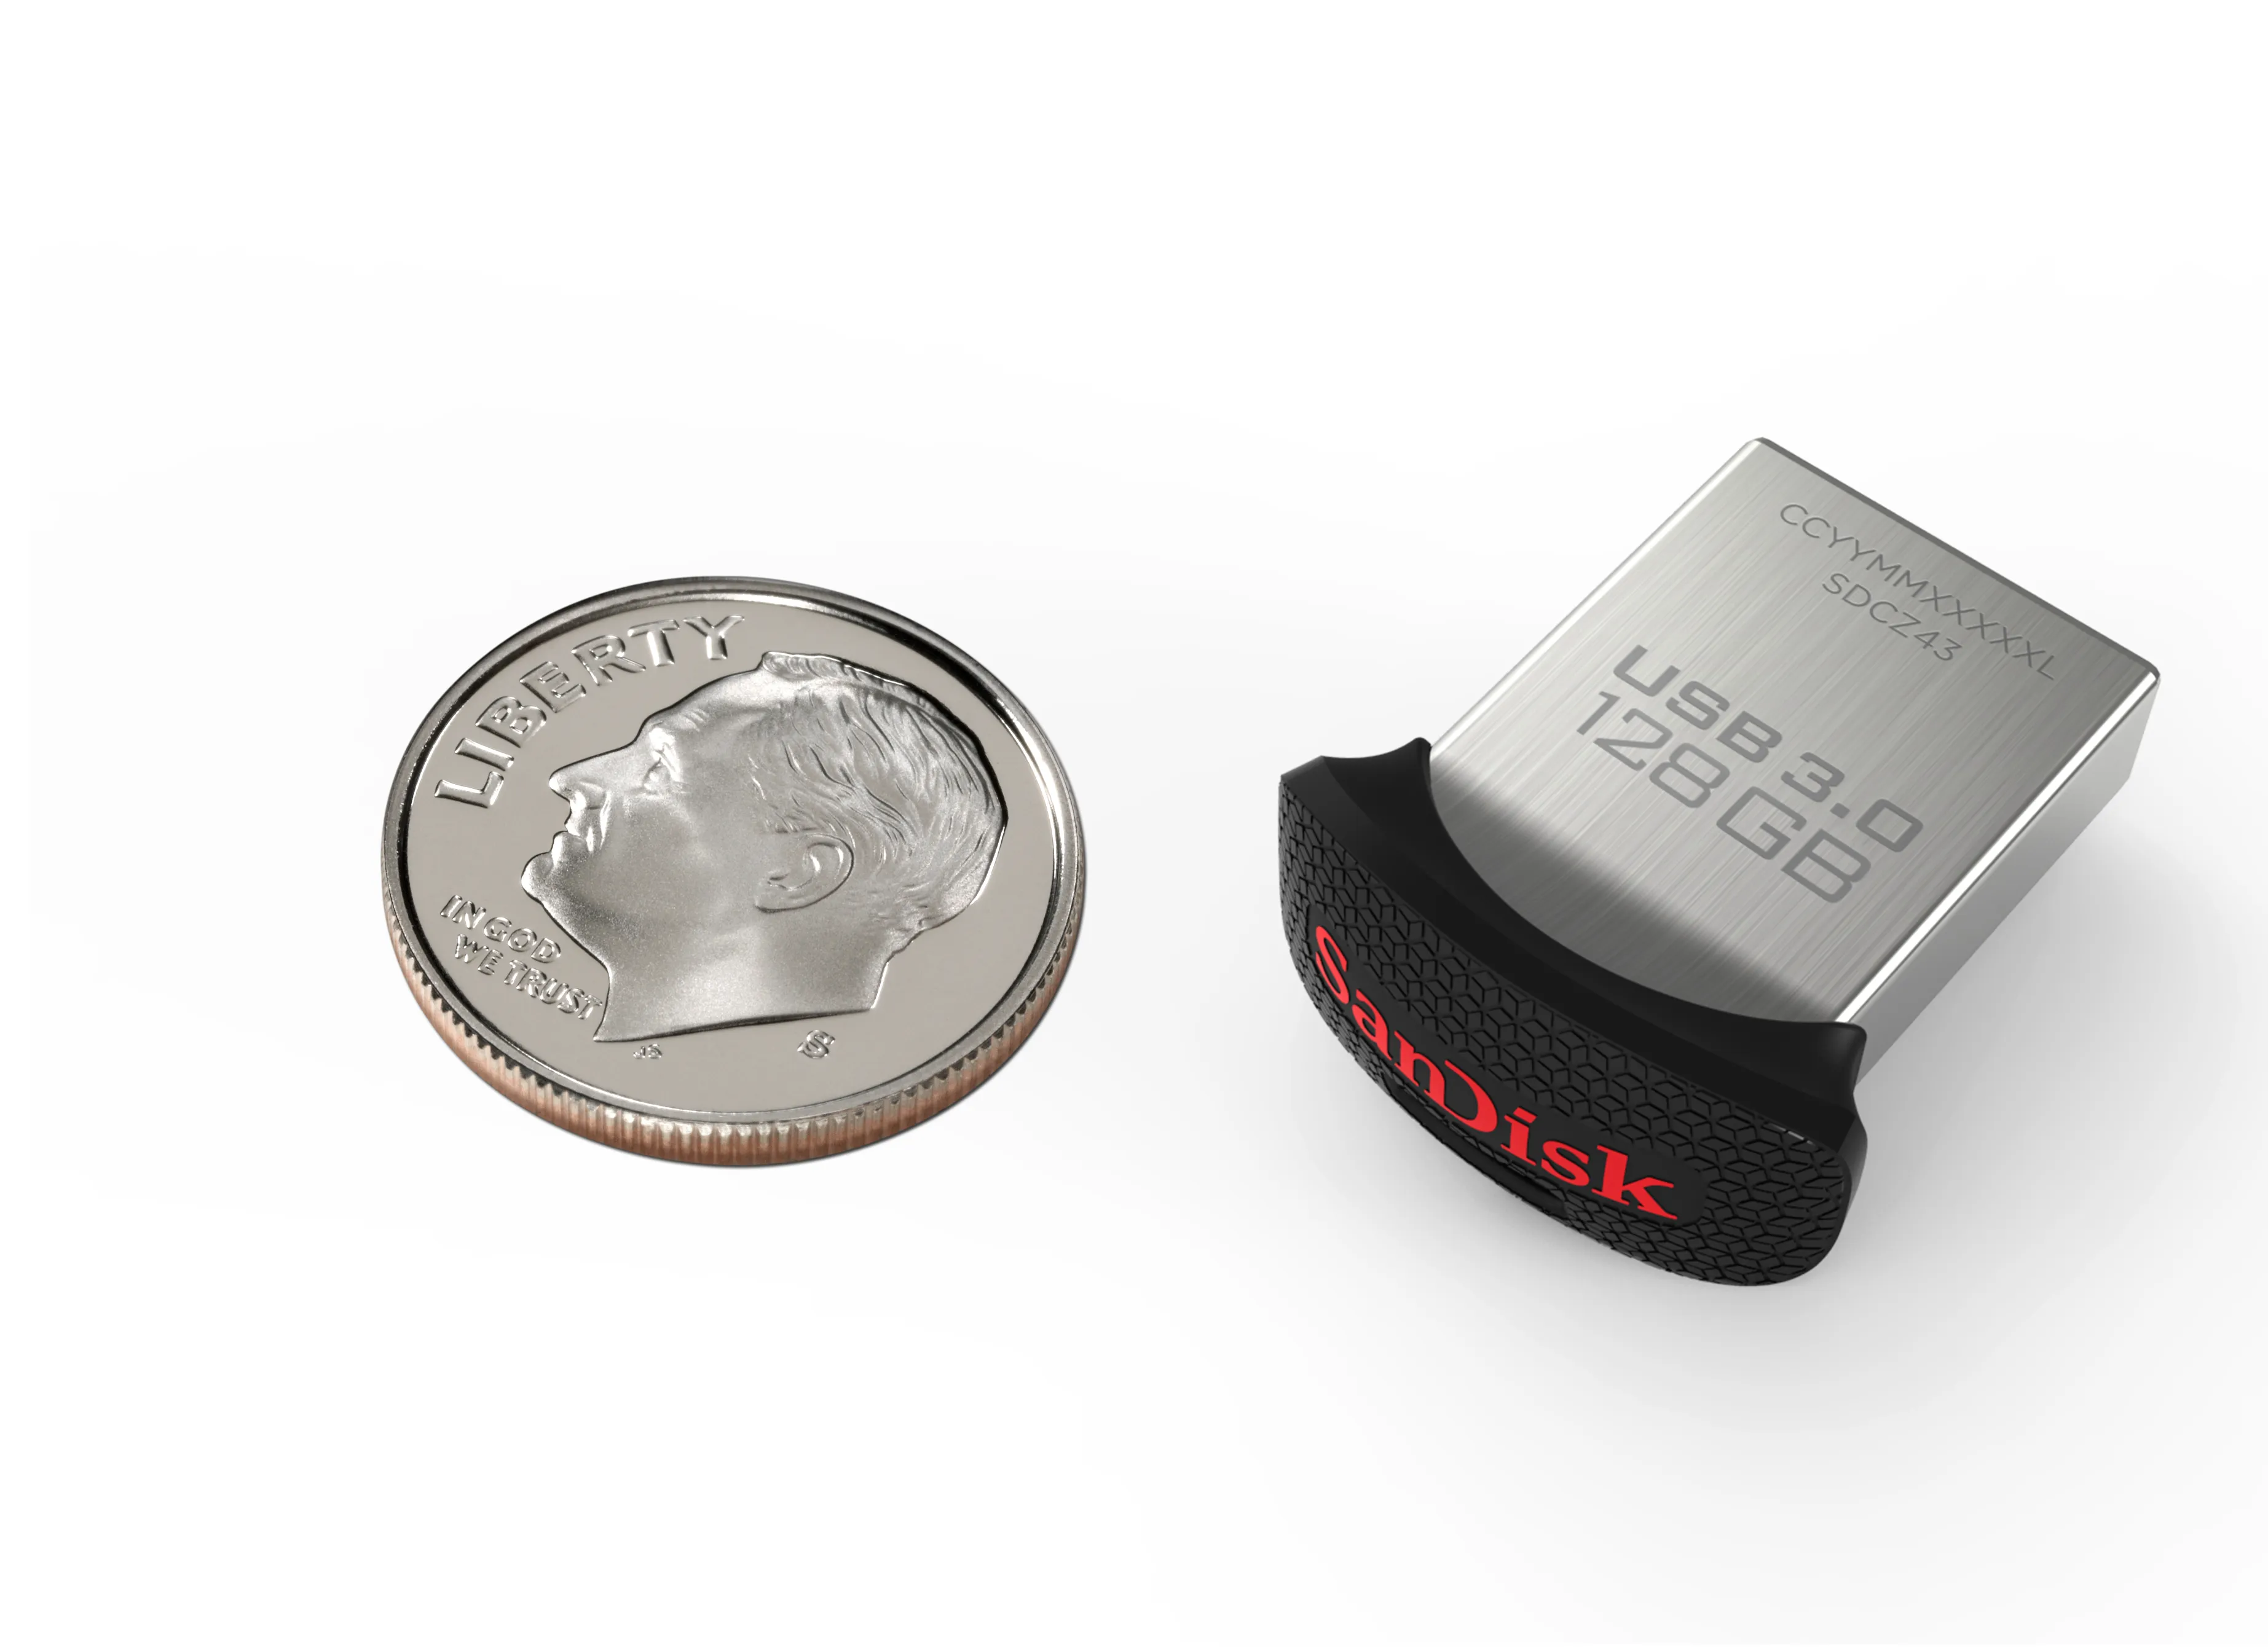 SanDisk Claims Ultra Fit is World's USB 3.0 Drive |